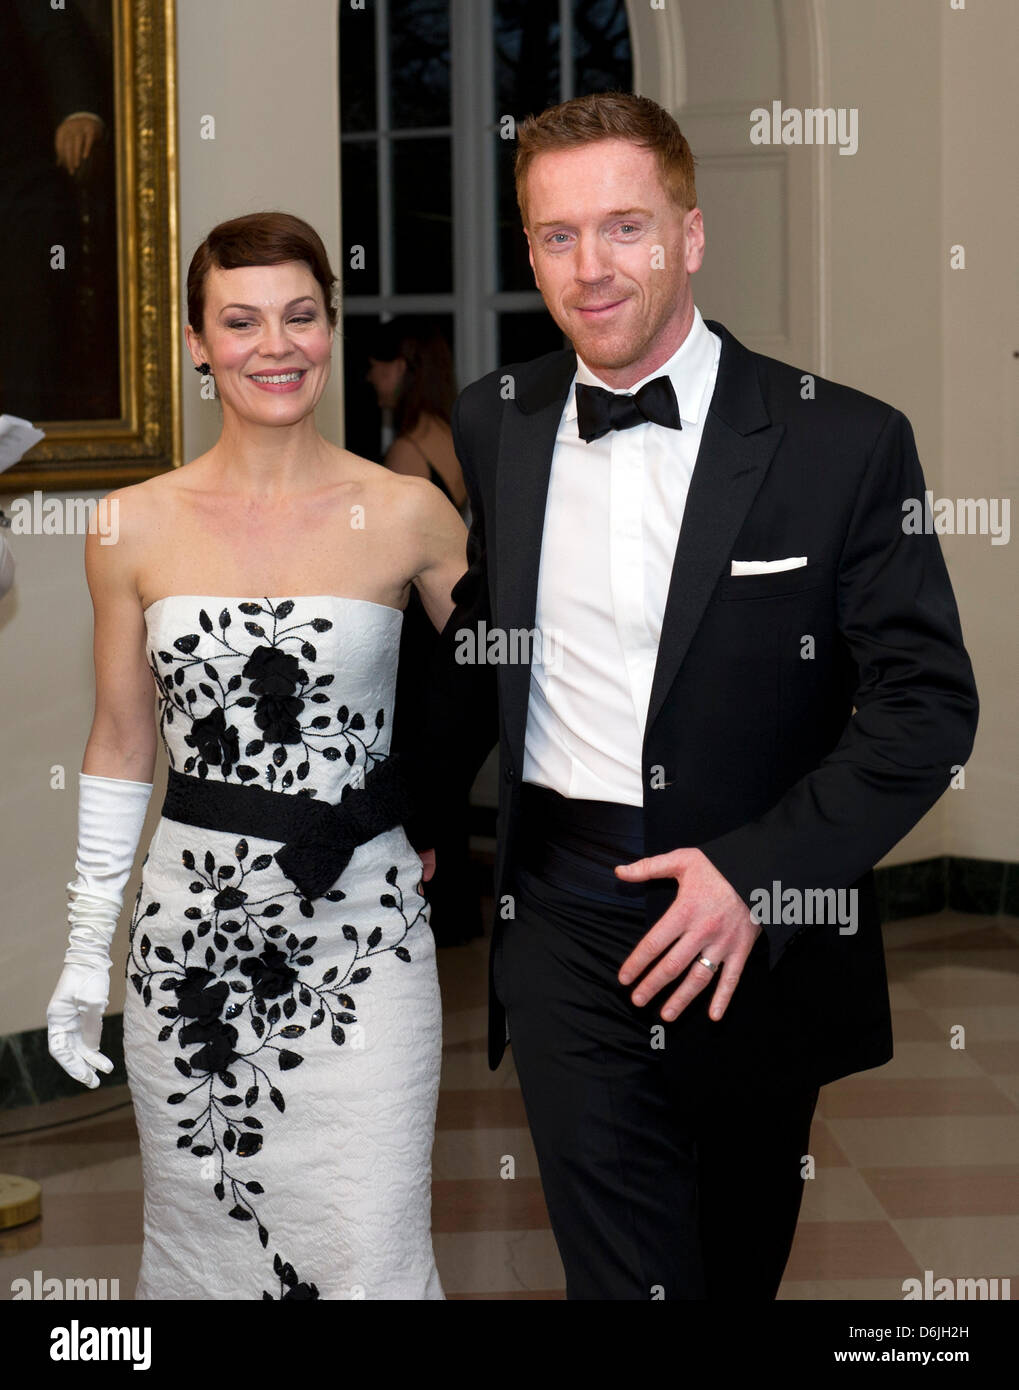 Damian Lewis and Helen McCrory arrive for the Official Dinner in honor of Prime Minister David Cameron of Great Britain and his wife, Samantha, at the White House in Washington, D.C., USA, 14 March 2012. Photo: Ron Sachs / CNP.(RESTRICTION: NO New York or New Jersey Newspapers or newspapers within a 75 mile radius of New York City) Stock Photo